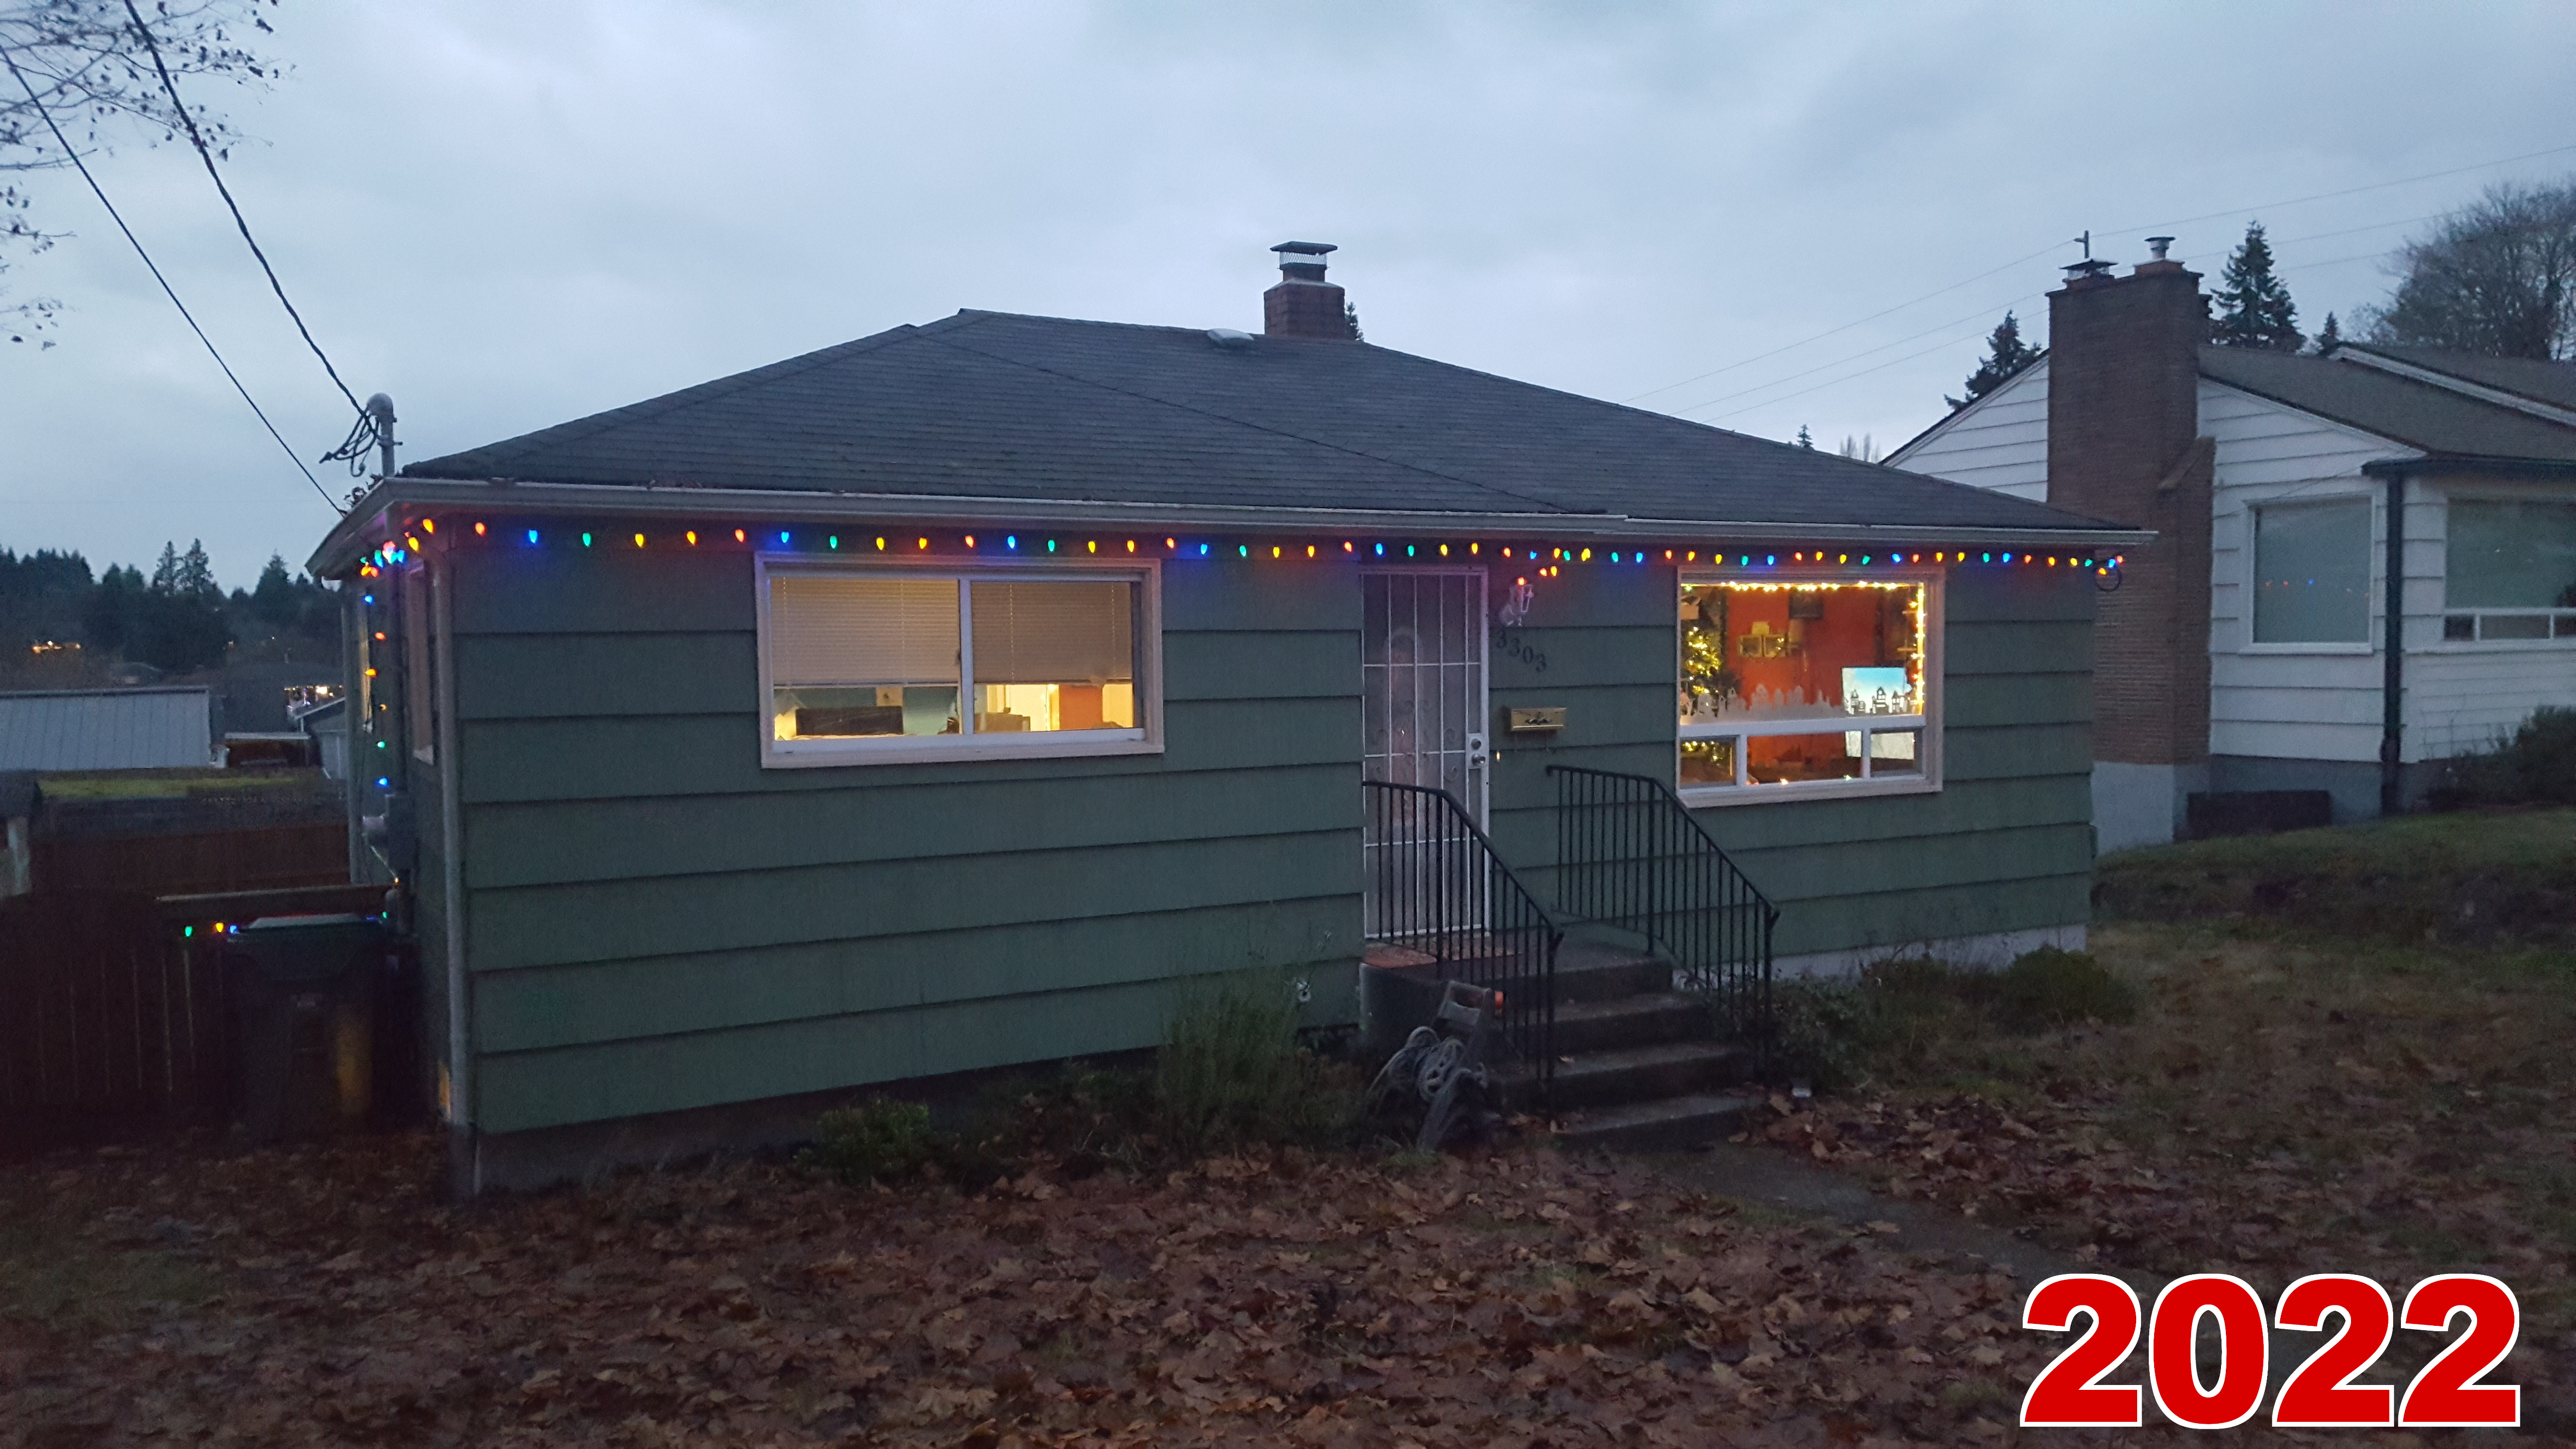 The exterior. Lights only along the trim this time. In the window we've got a cutout christmas village we made, and lights around the interior edge.